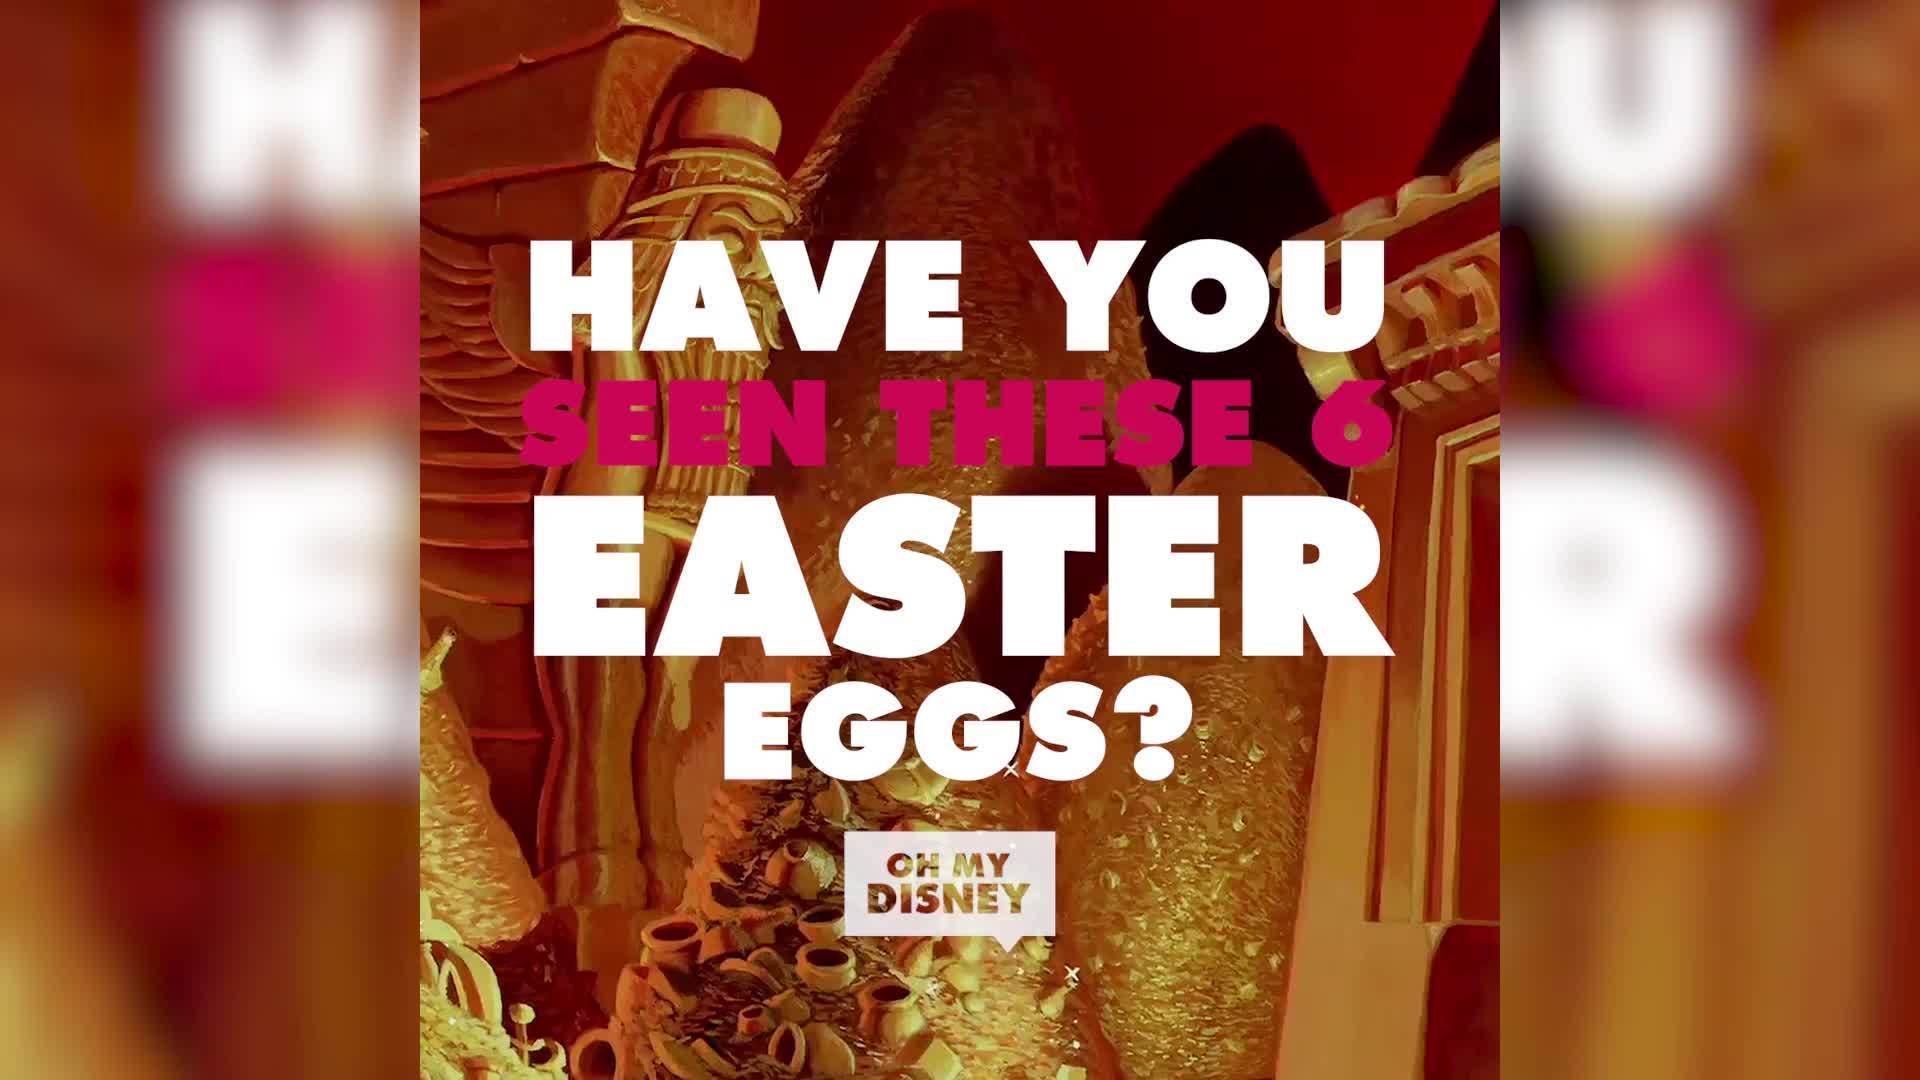 Have You Seen These 6 Easter Eggs? | Oh My Disney